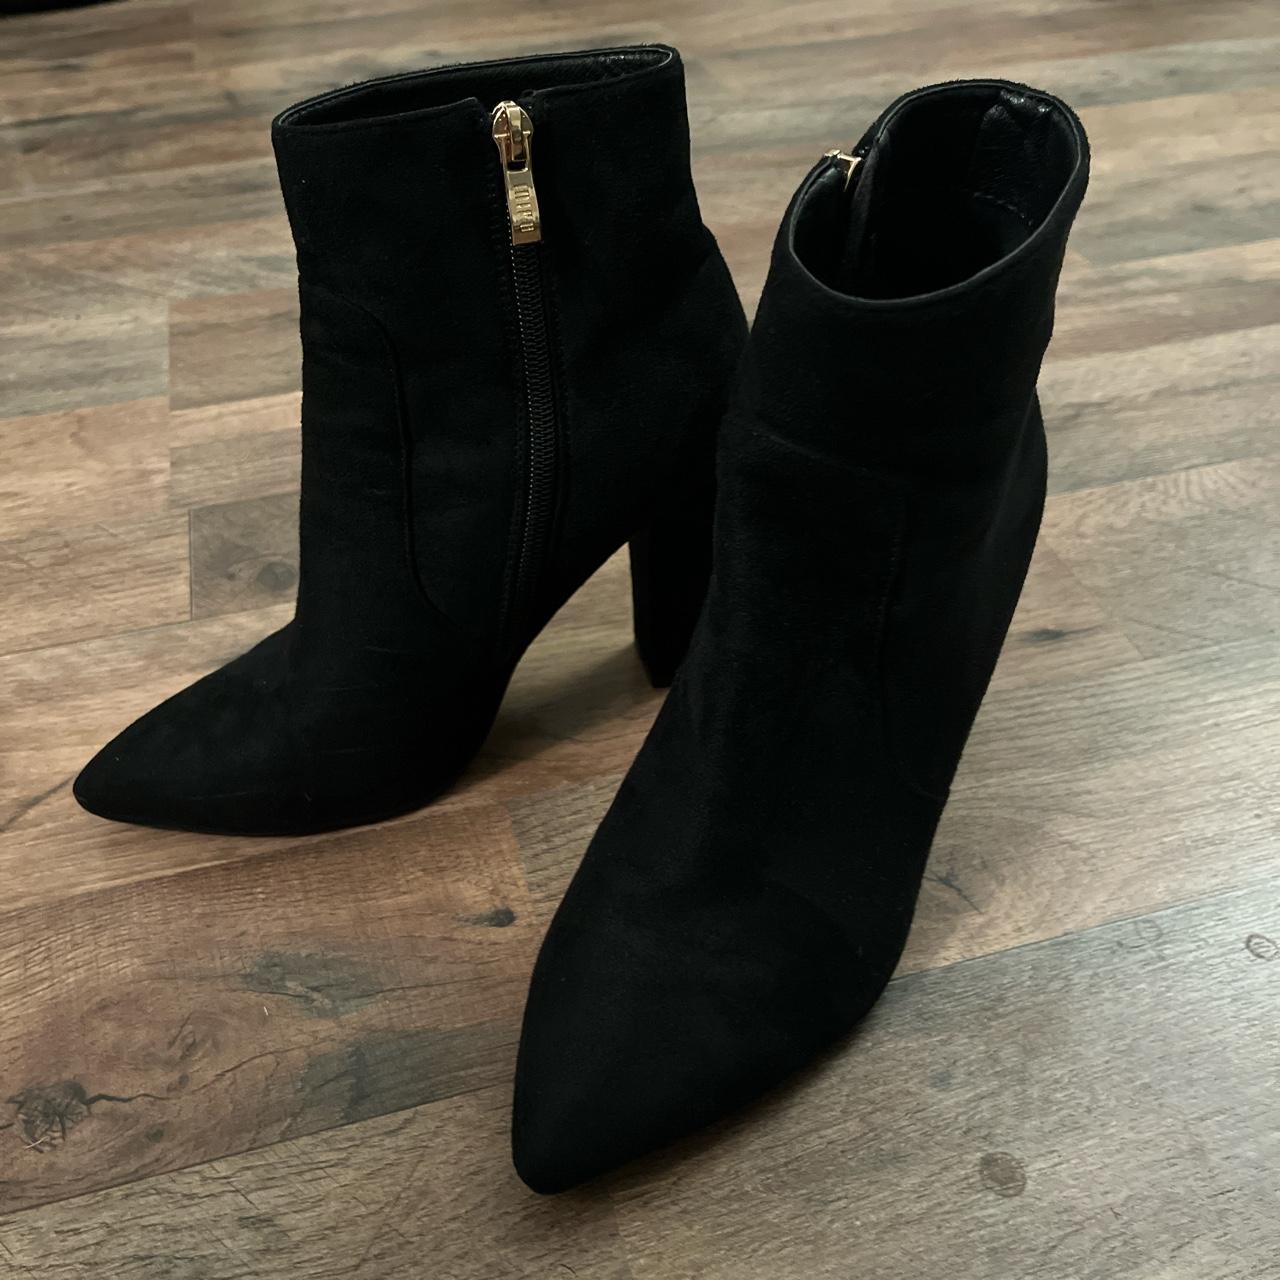 black suede booties 🌟 • size 7.5 • love these but... - Depop